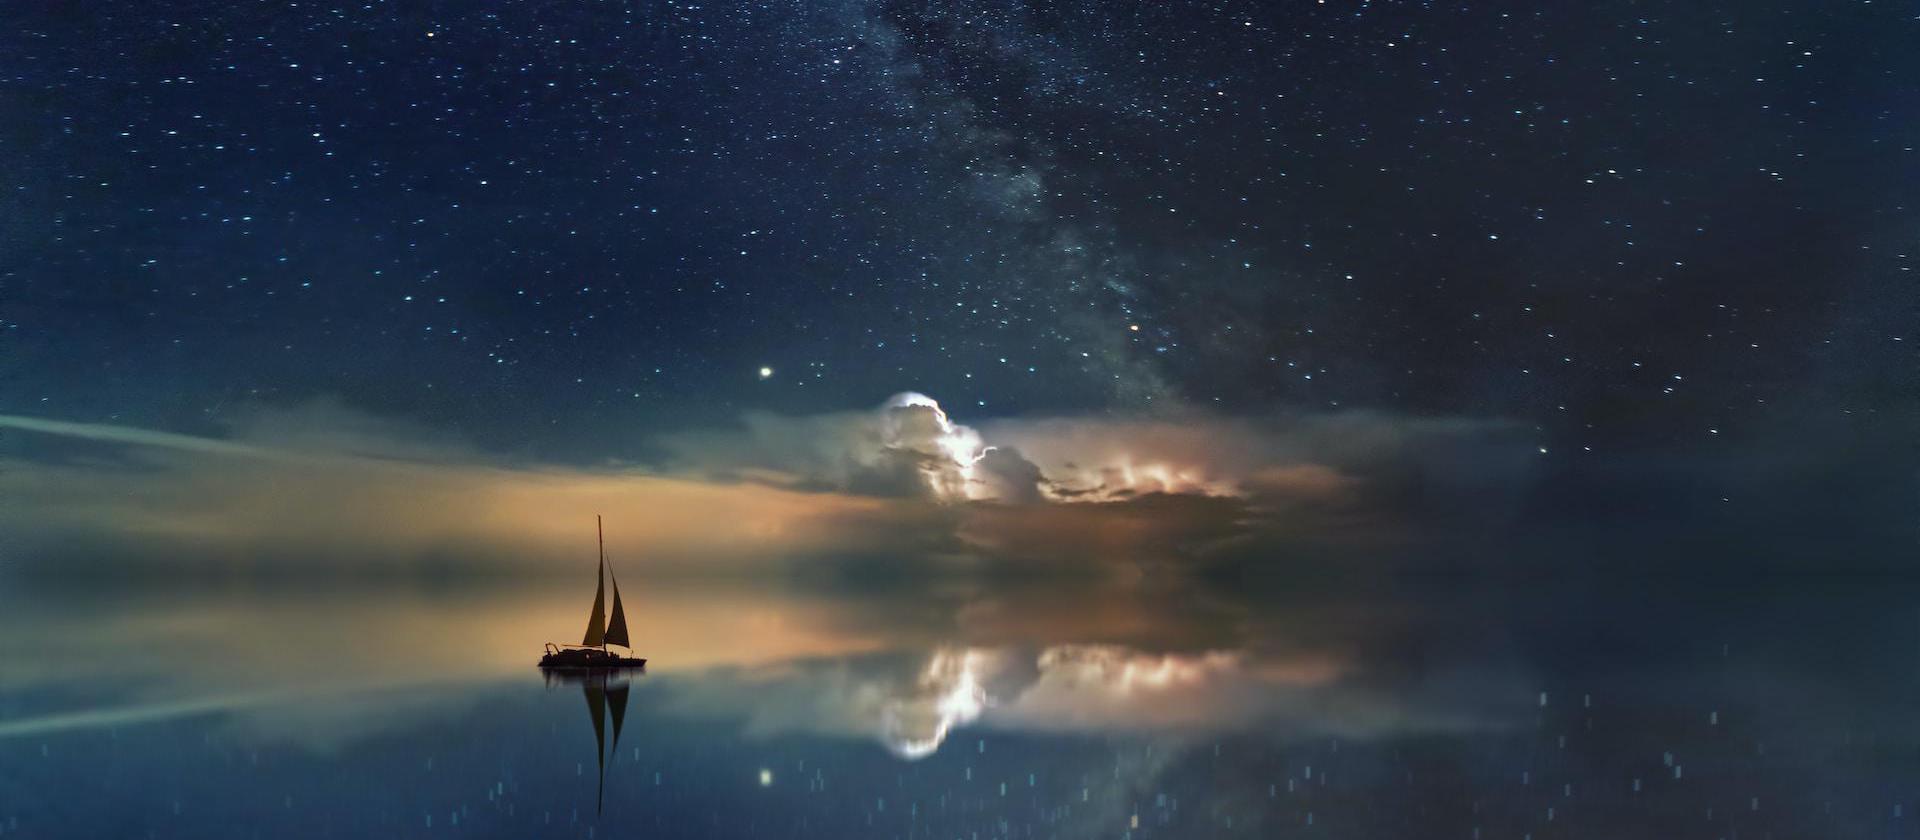 Image of a sailing ship on a sea of stars with a galaxy above.